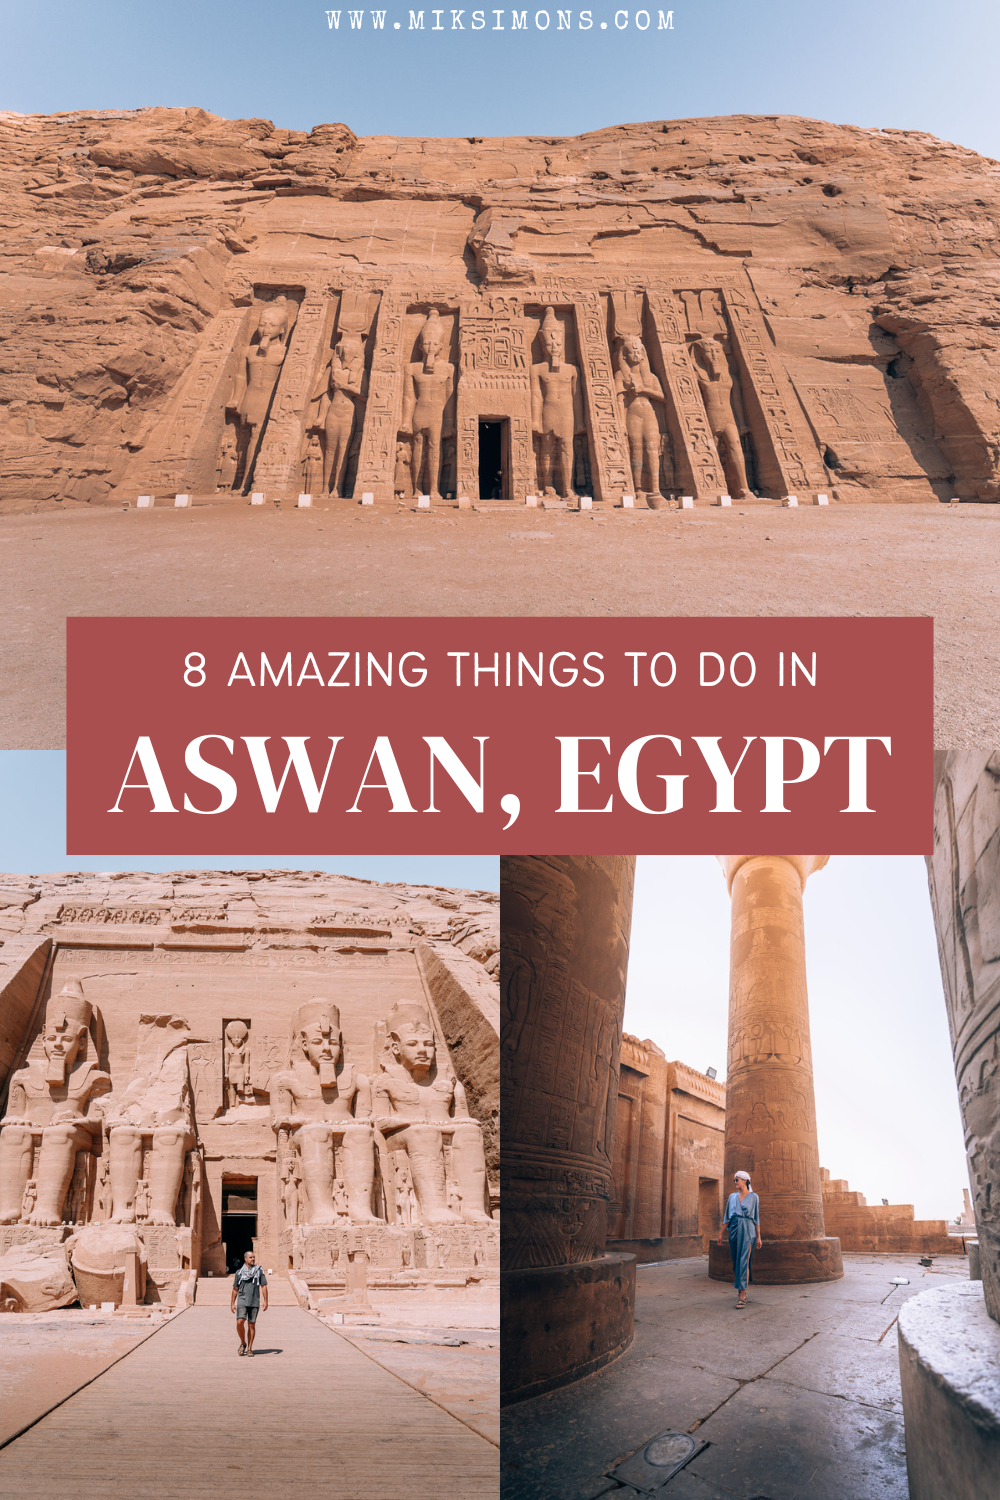 8 amazing things to do in Aswan3